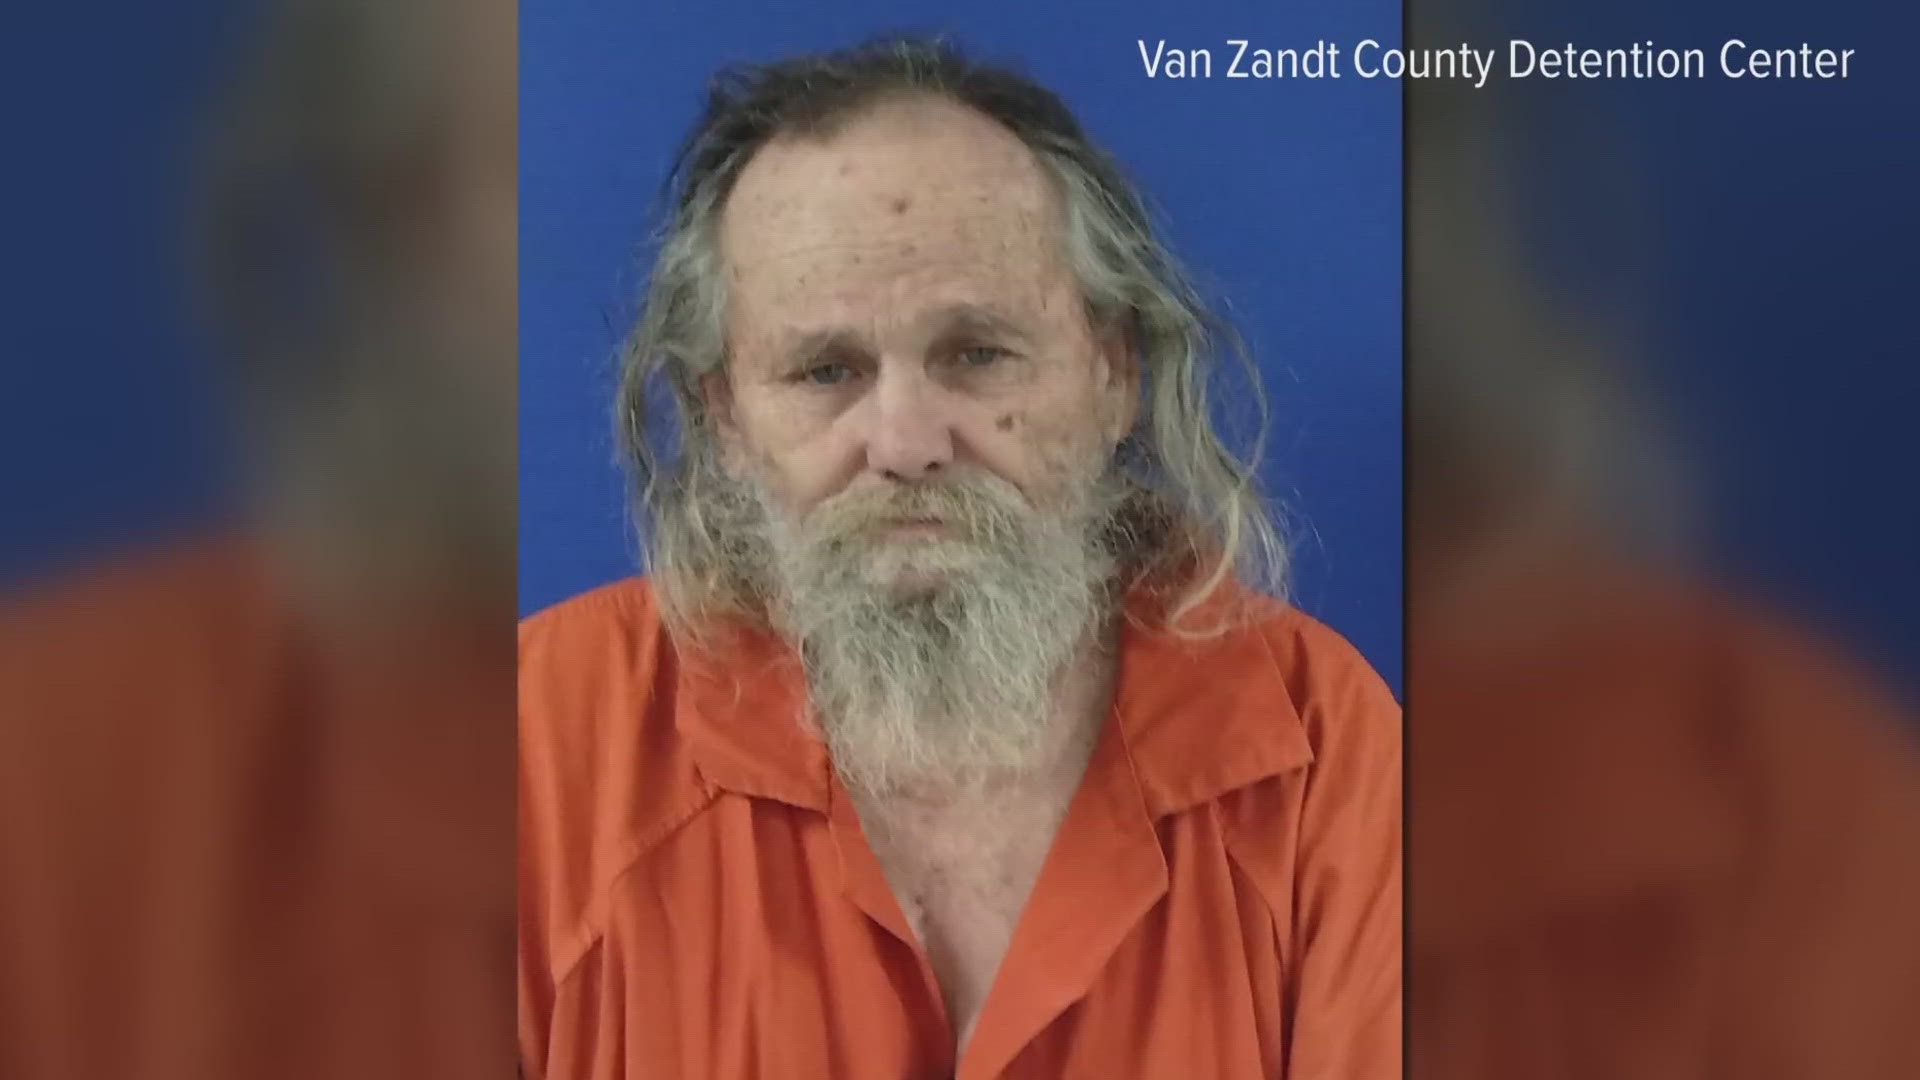 A man was arrested in connection to a nearly 40-year-old cold case regarding the disappearance of Susan Bender.